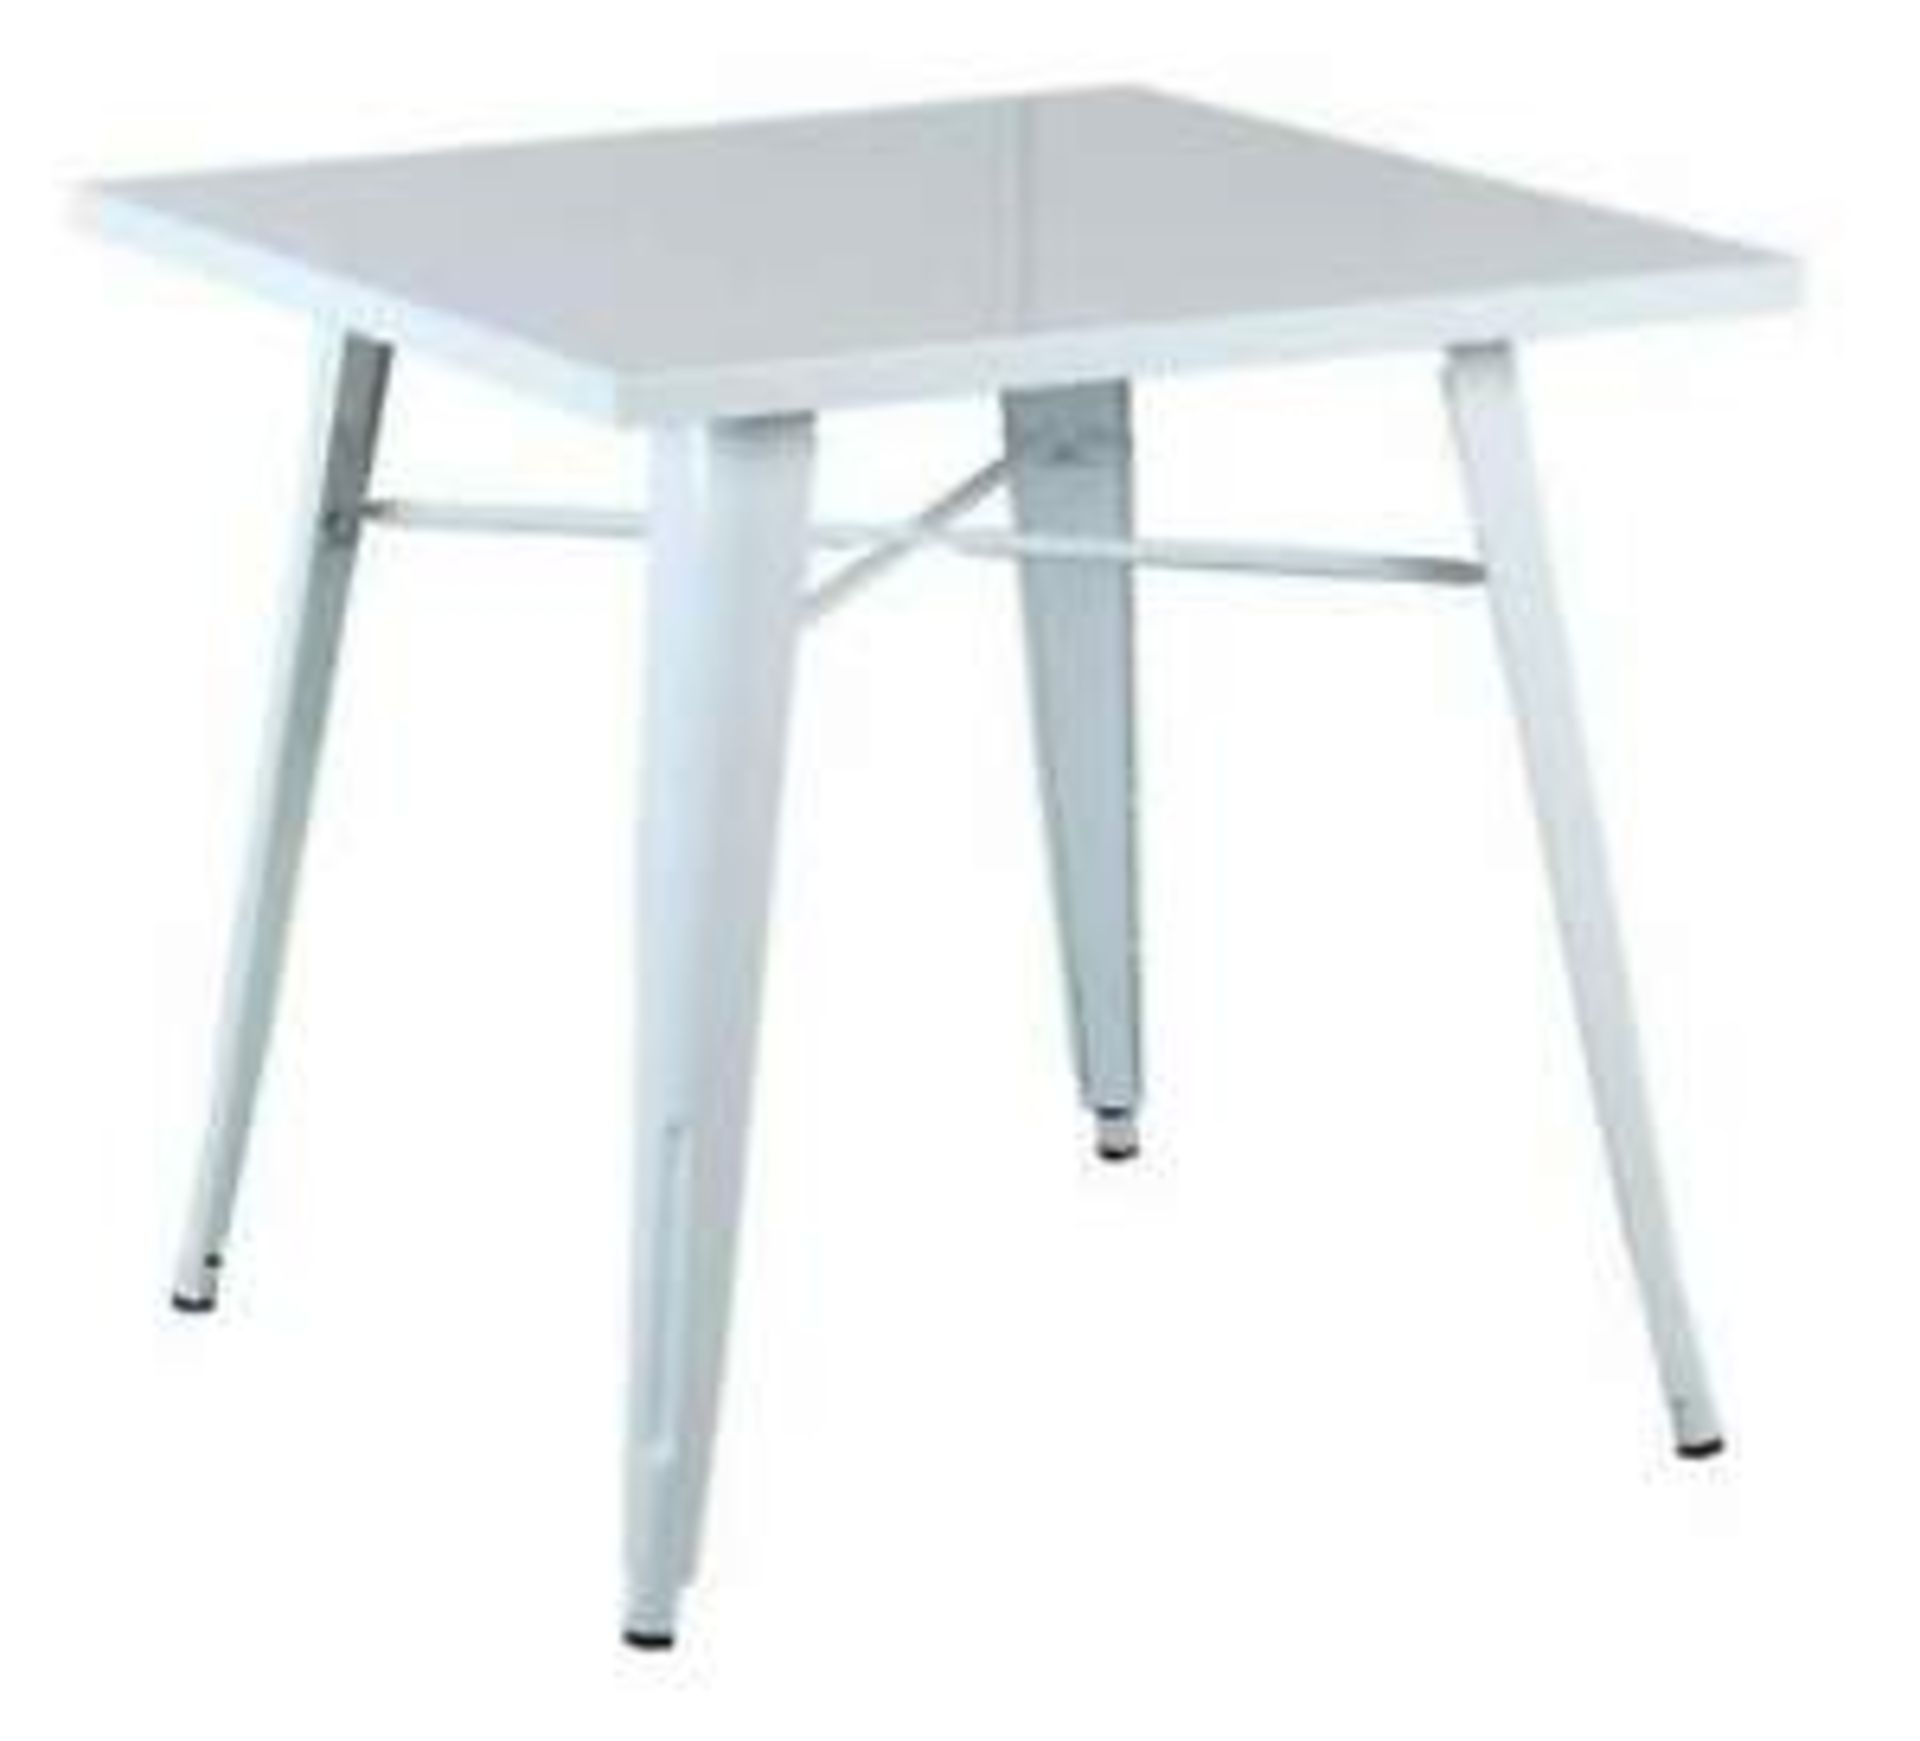 1 x Tolix Industrial Style Outdoor Bistro Table and Chair Set in White- Includes 1 x Table and 4 x - Image 2 of 13